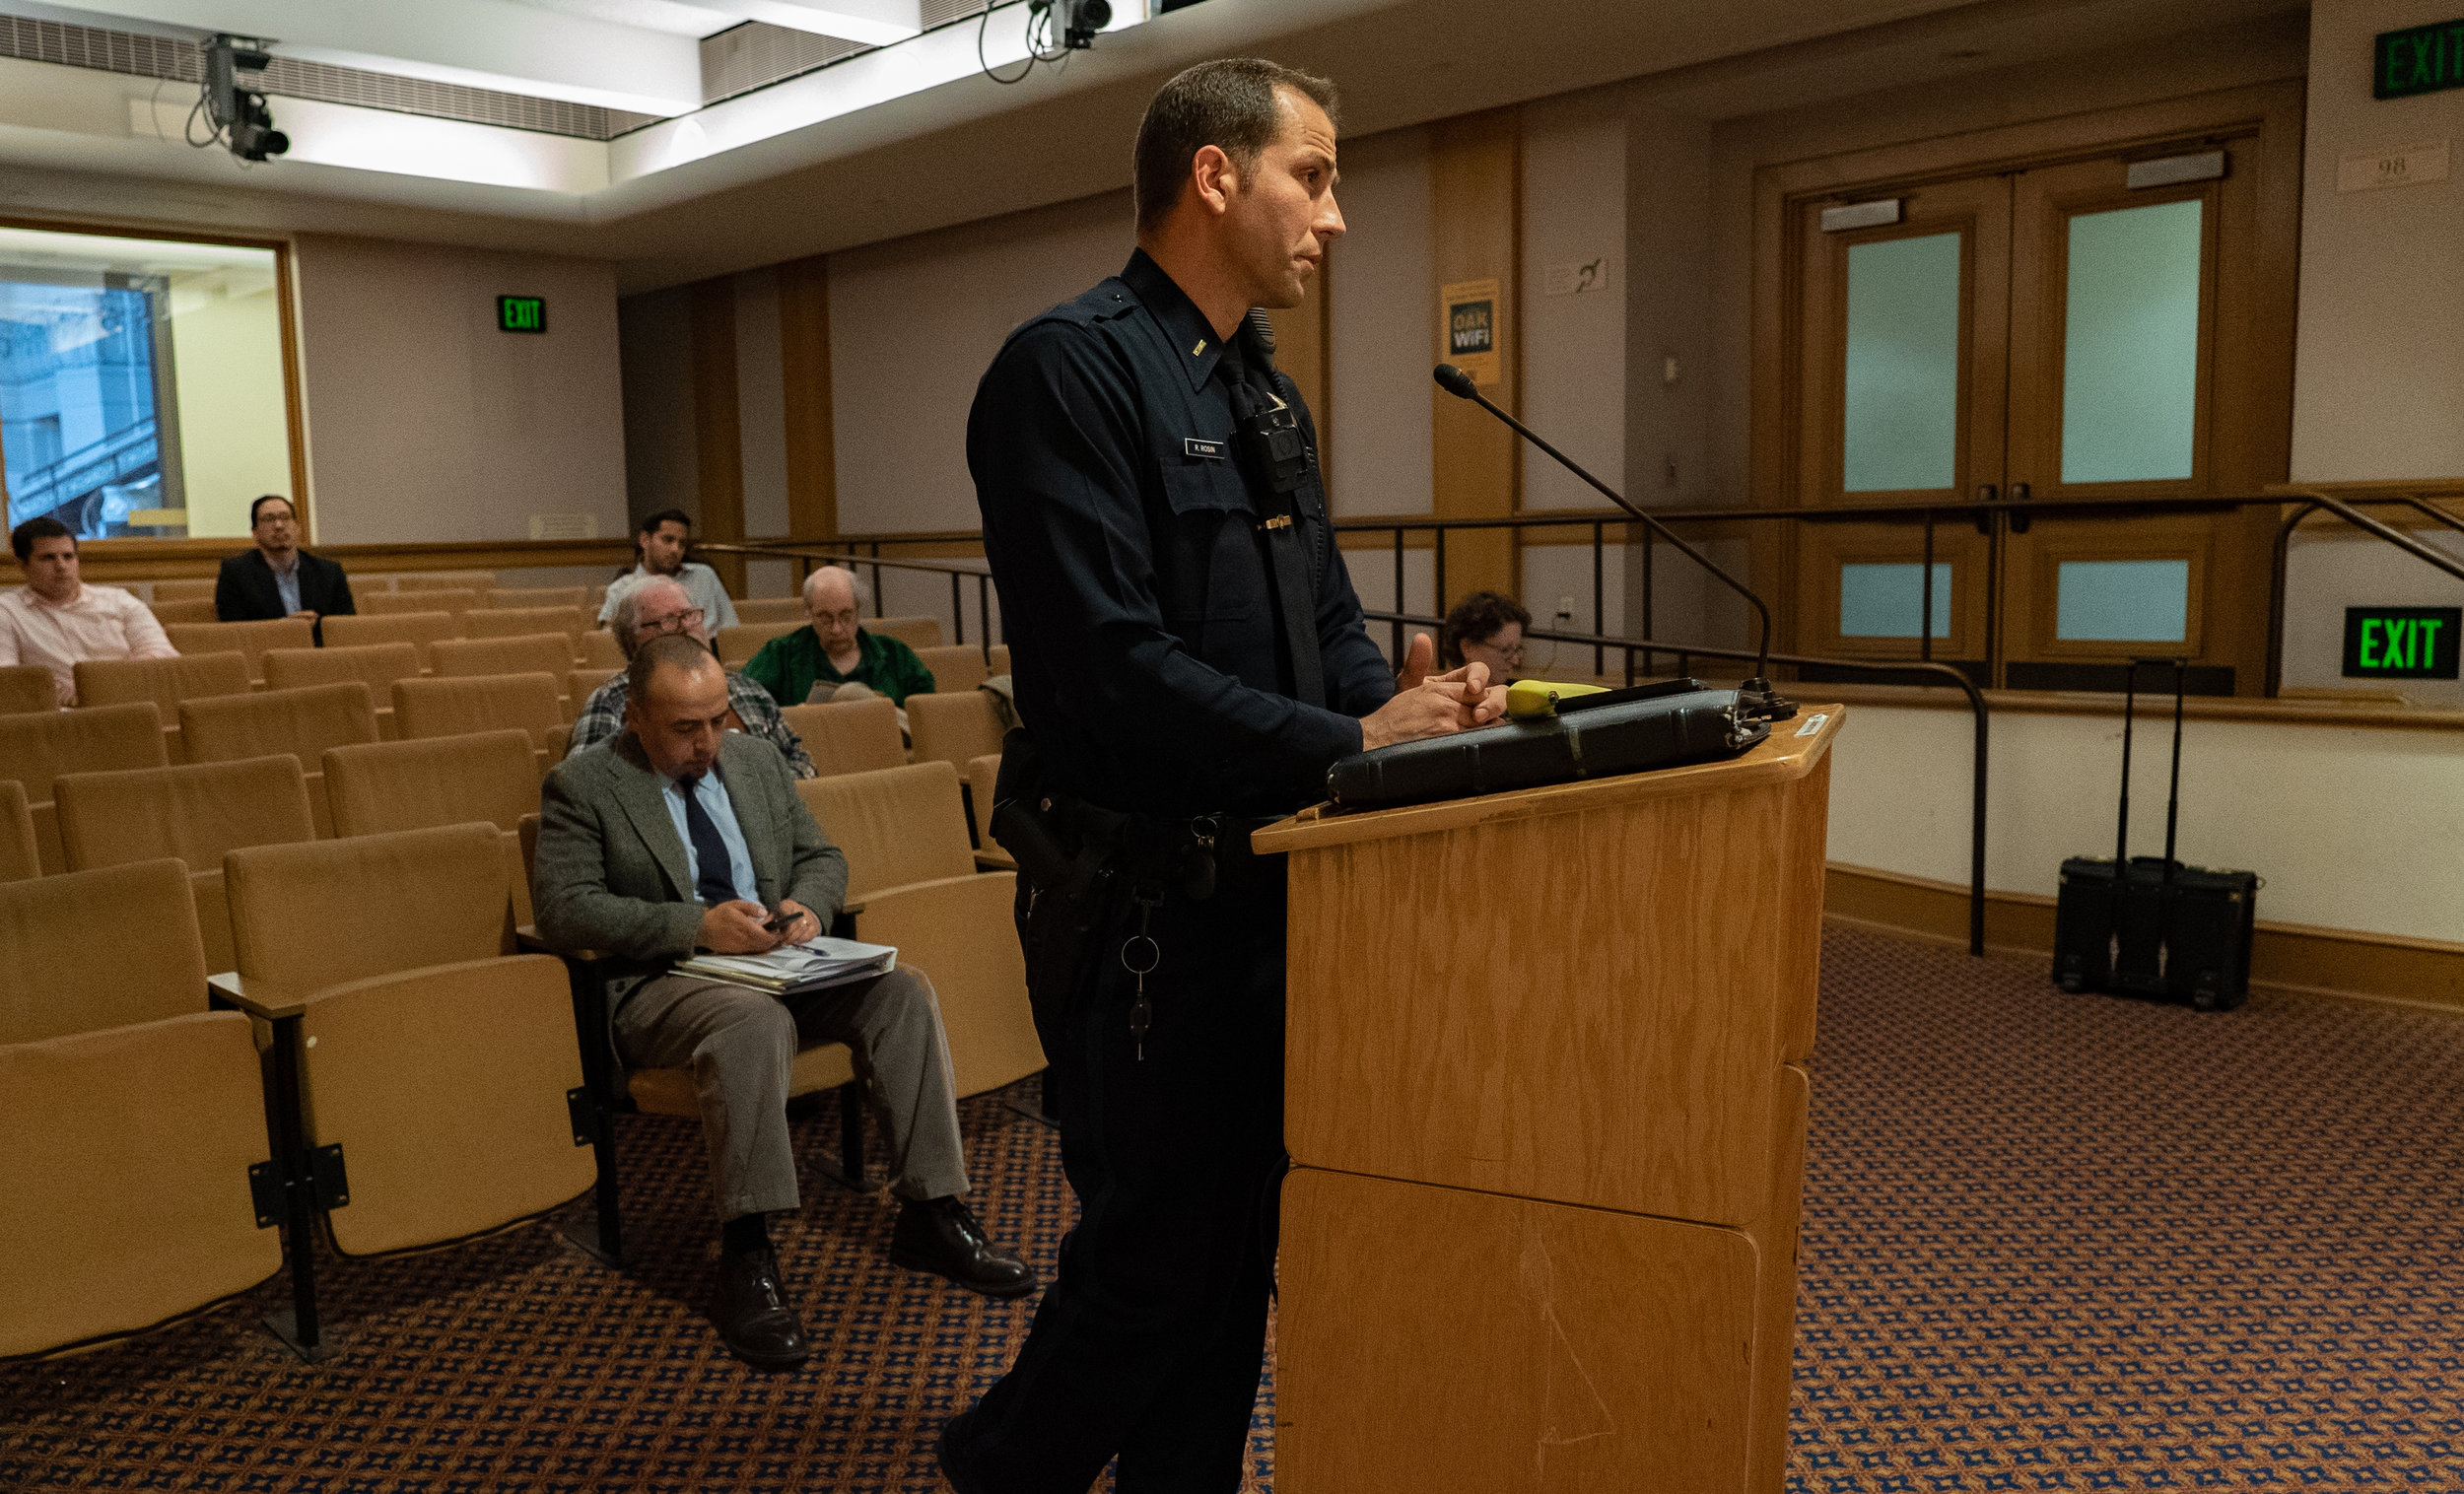  An Oakland Police Department officer speaks on the benefits of automated license plate readers before the Commission.  